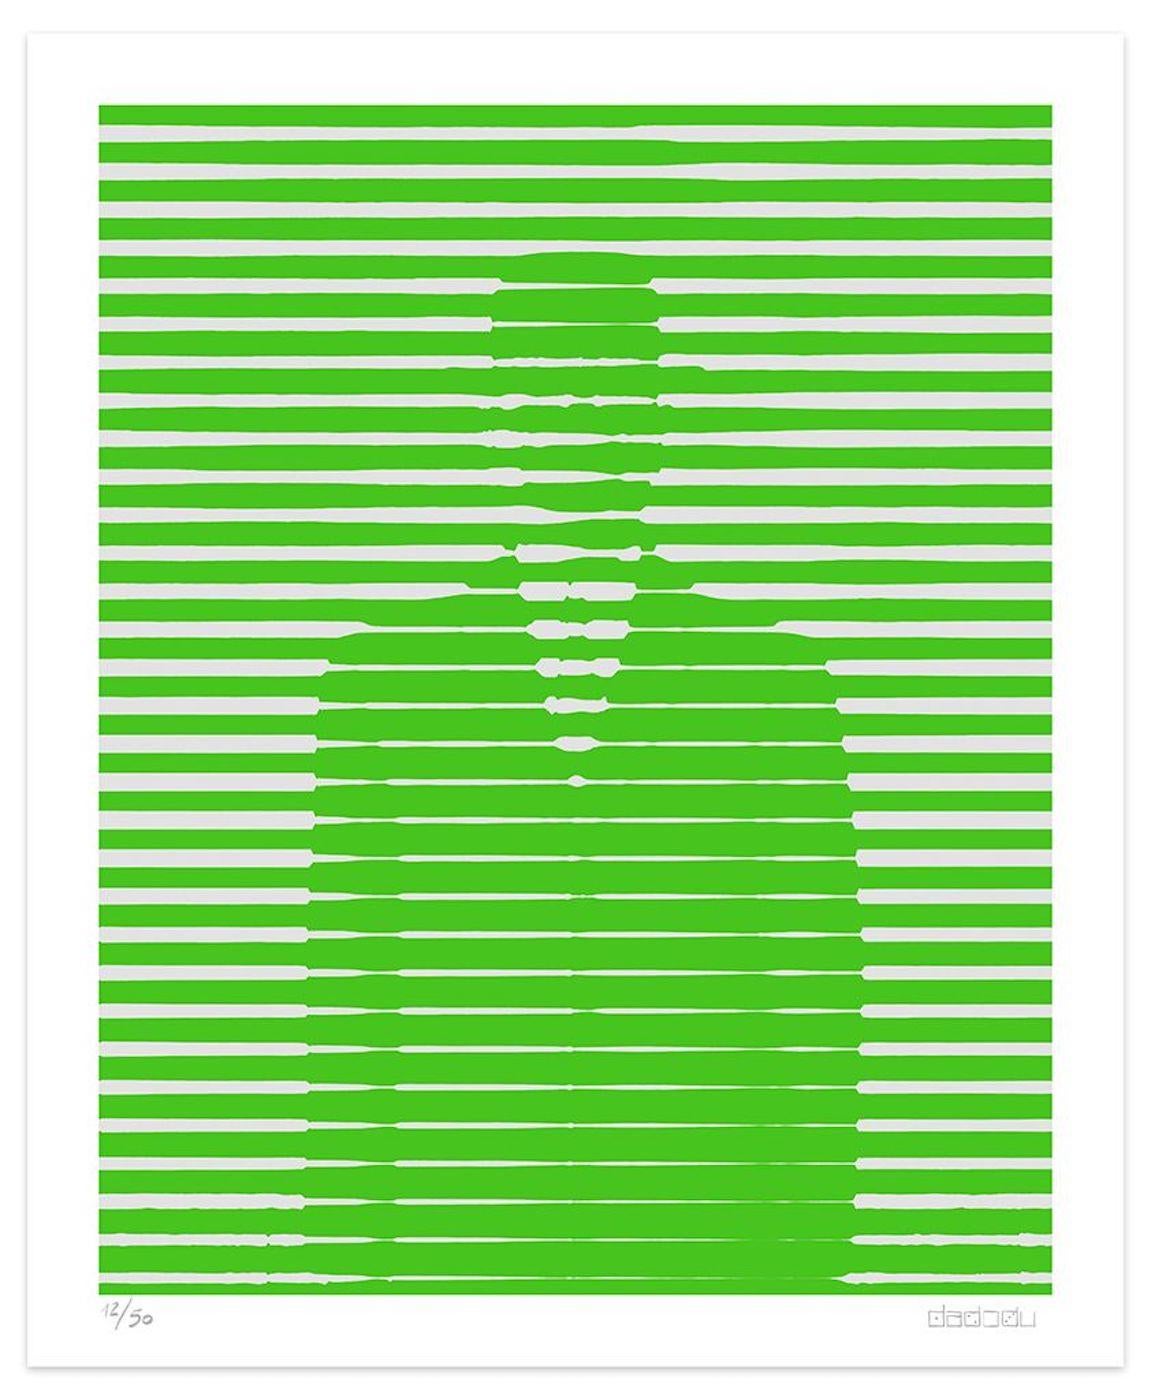 Image dimensions: 60 x 48.1 cm.

Green And Grey Lines is an elegant giclée print realized by the contemporary artist Dadodu in 2016.

This original artwork represents Decalcomanie by René Magritte with horizontal white lines on a green